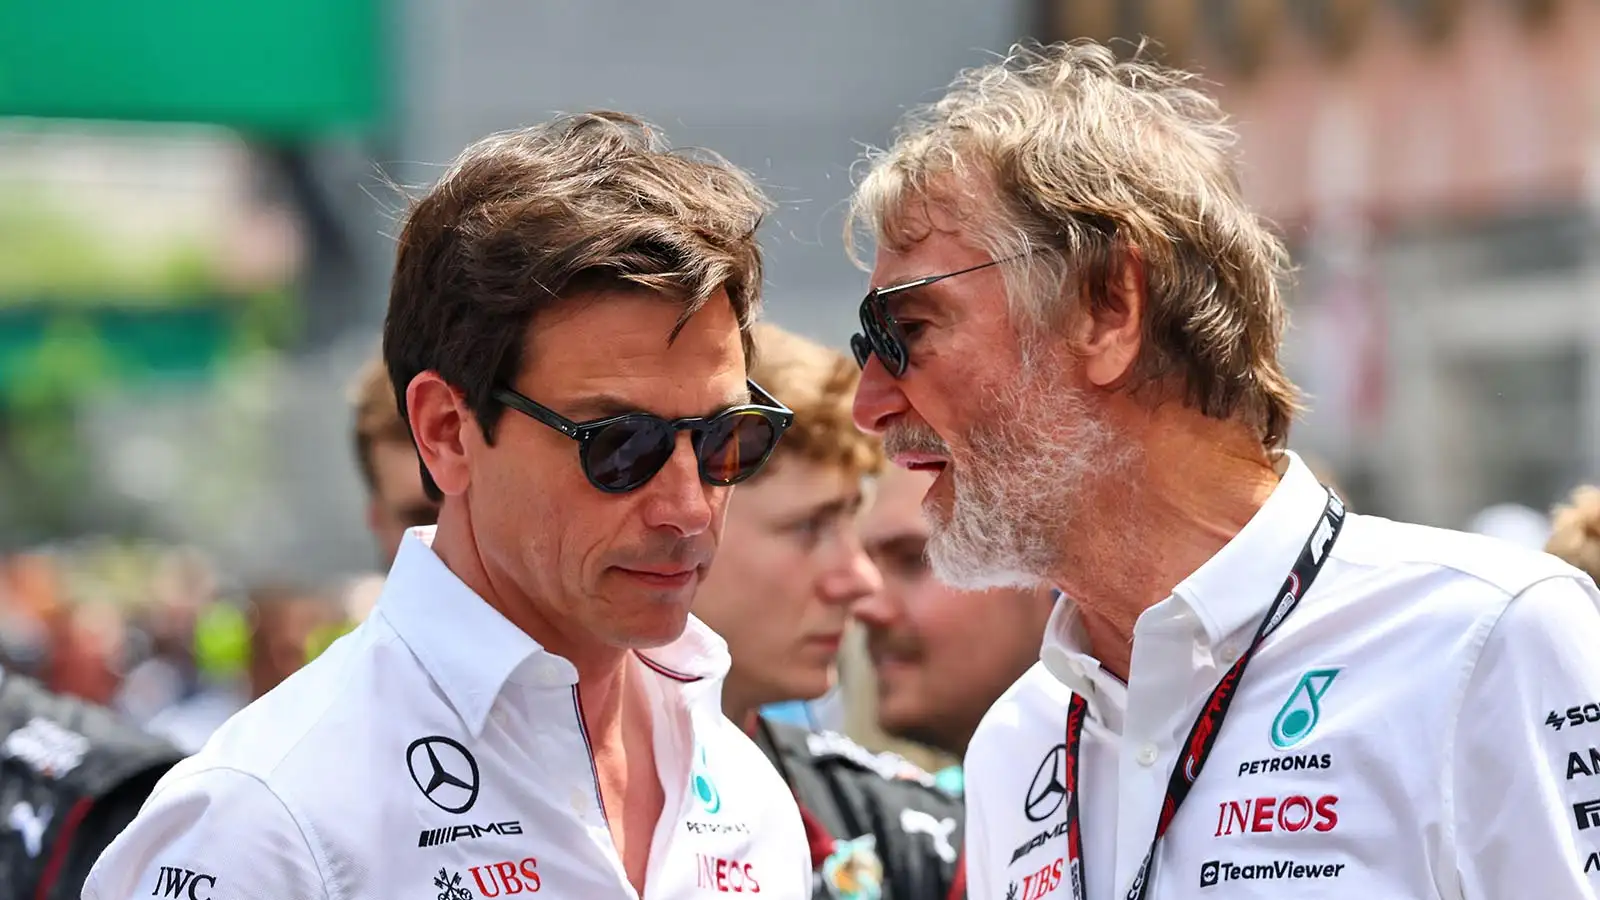 Mercedes F1 co-owners Toto Wolff and Jim Ratcliffe in discussion at the Monaco Grand Prix. Monte Carlo, May 2023.